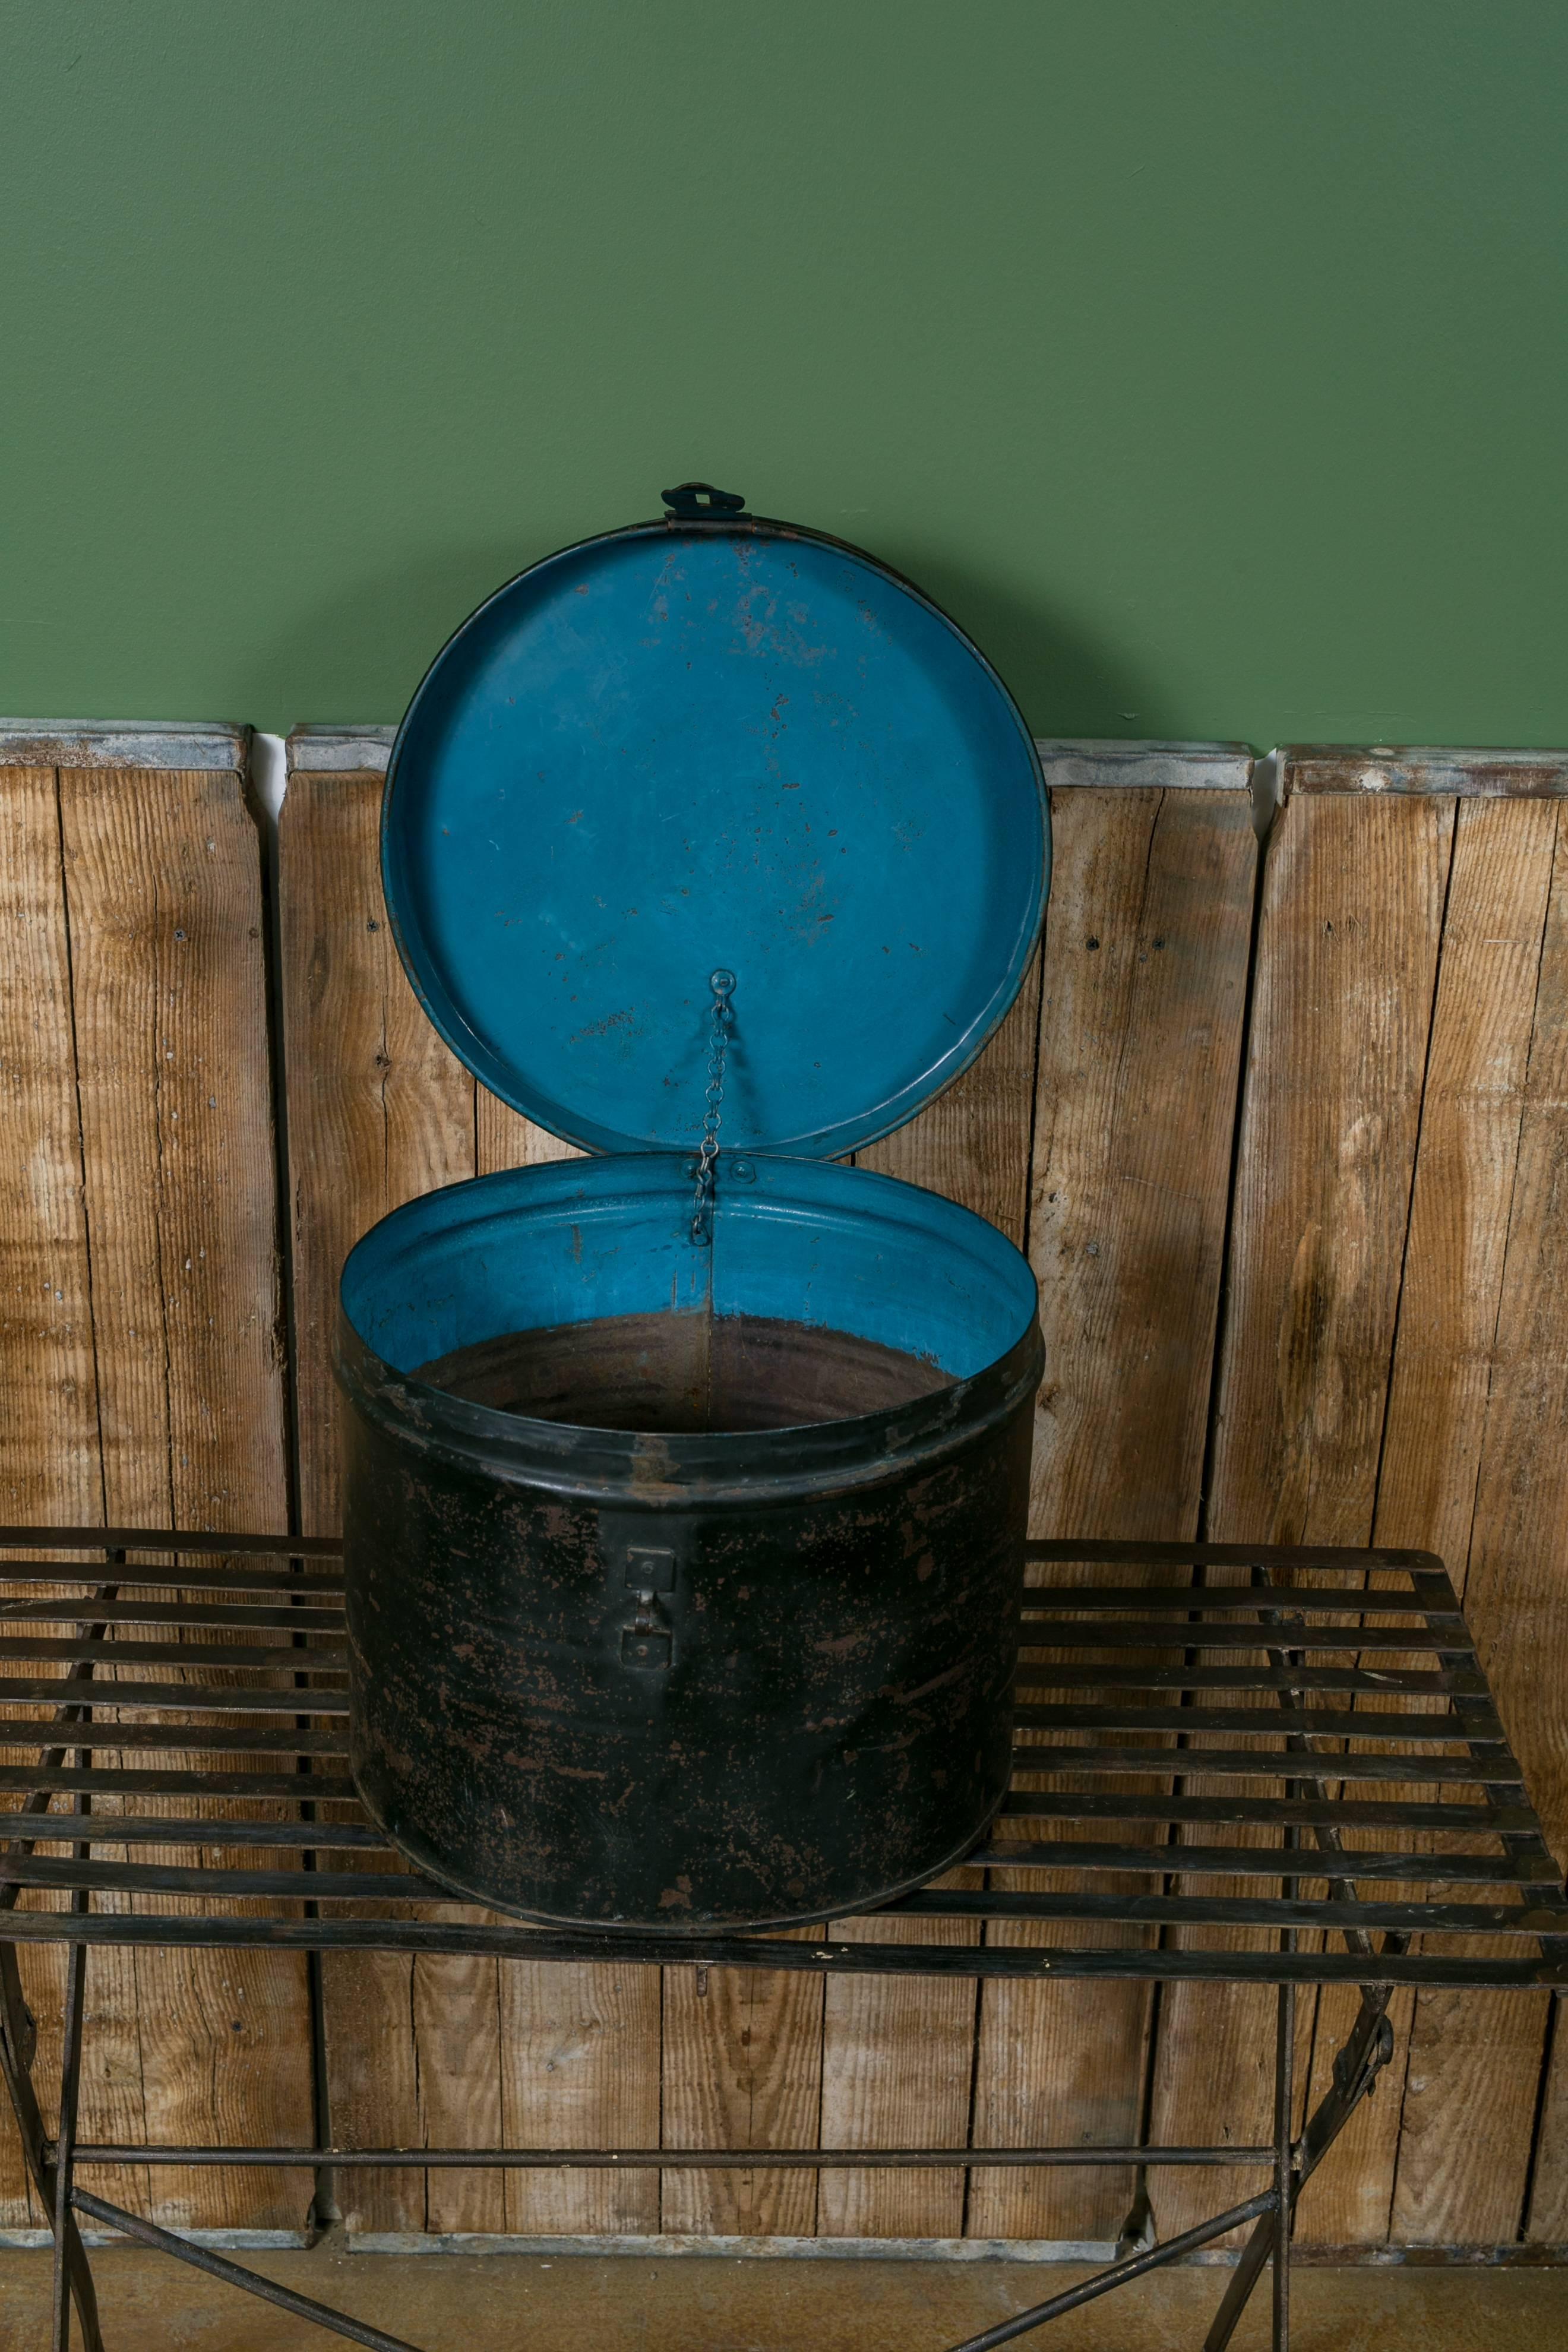 Hinging metal hat box from J. Delsart, Belgium, circa 1920. Black painted exterior with bright blue interior lid and banding. Original stamped metal plaque on the front above the metal hinge with chain on interior.